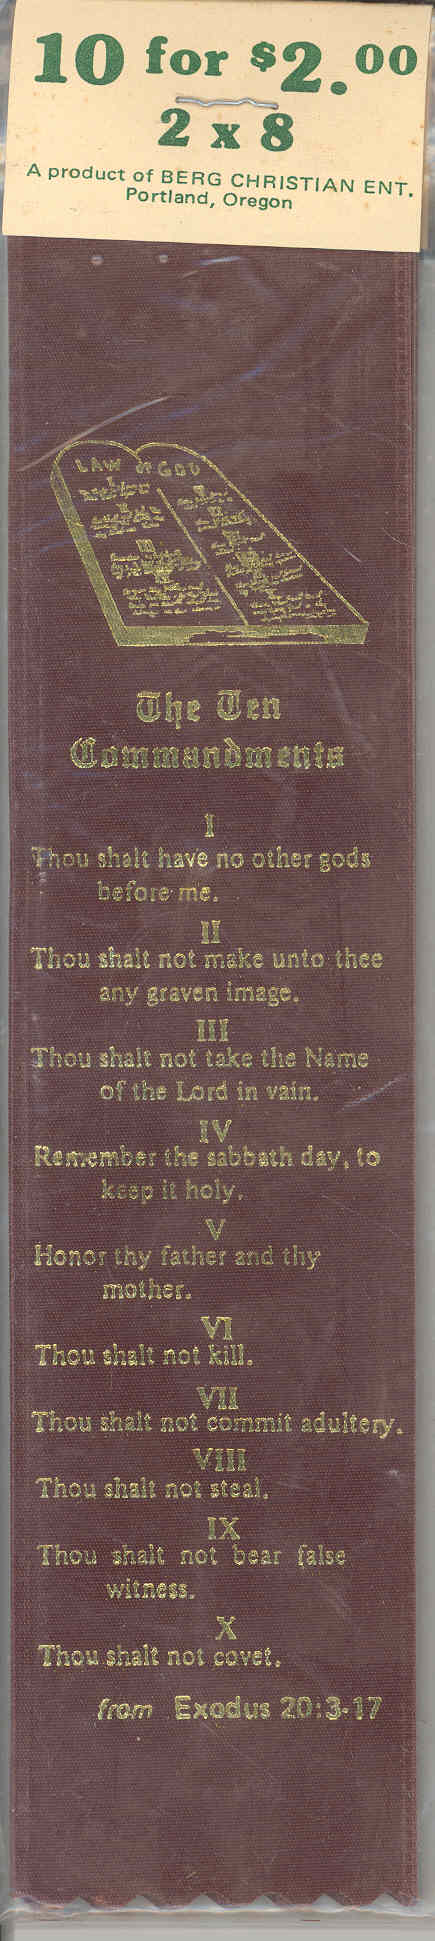 Pack of Bookmarks: 10 Commandments